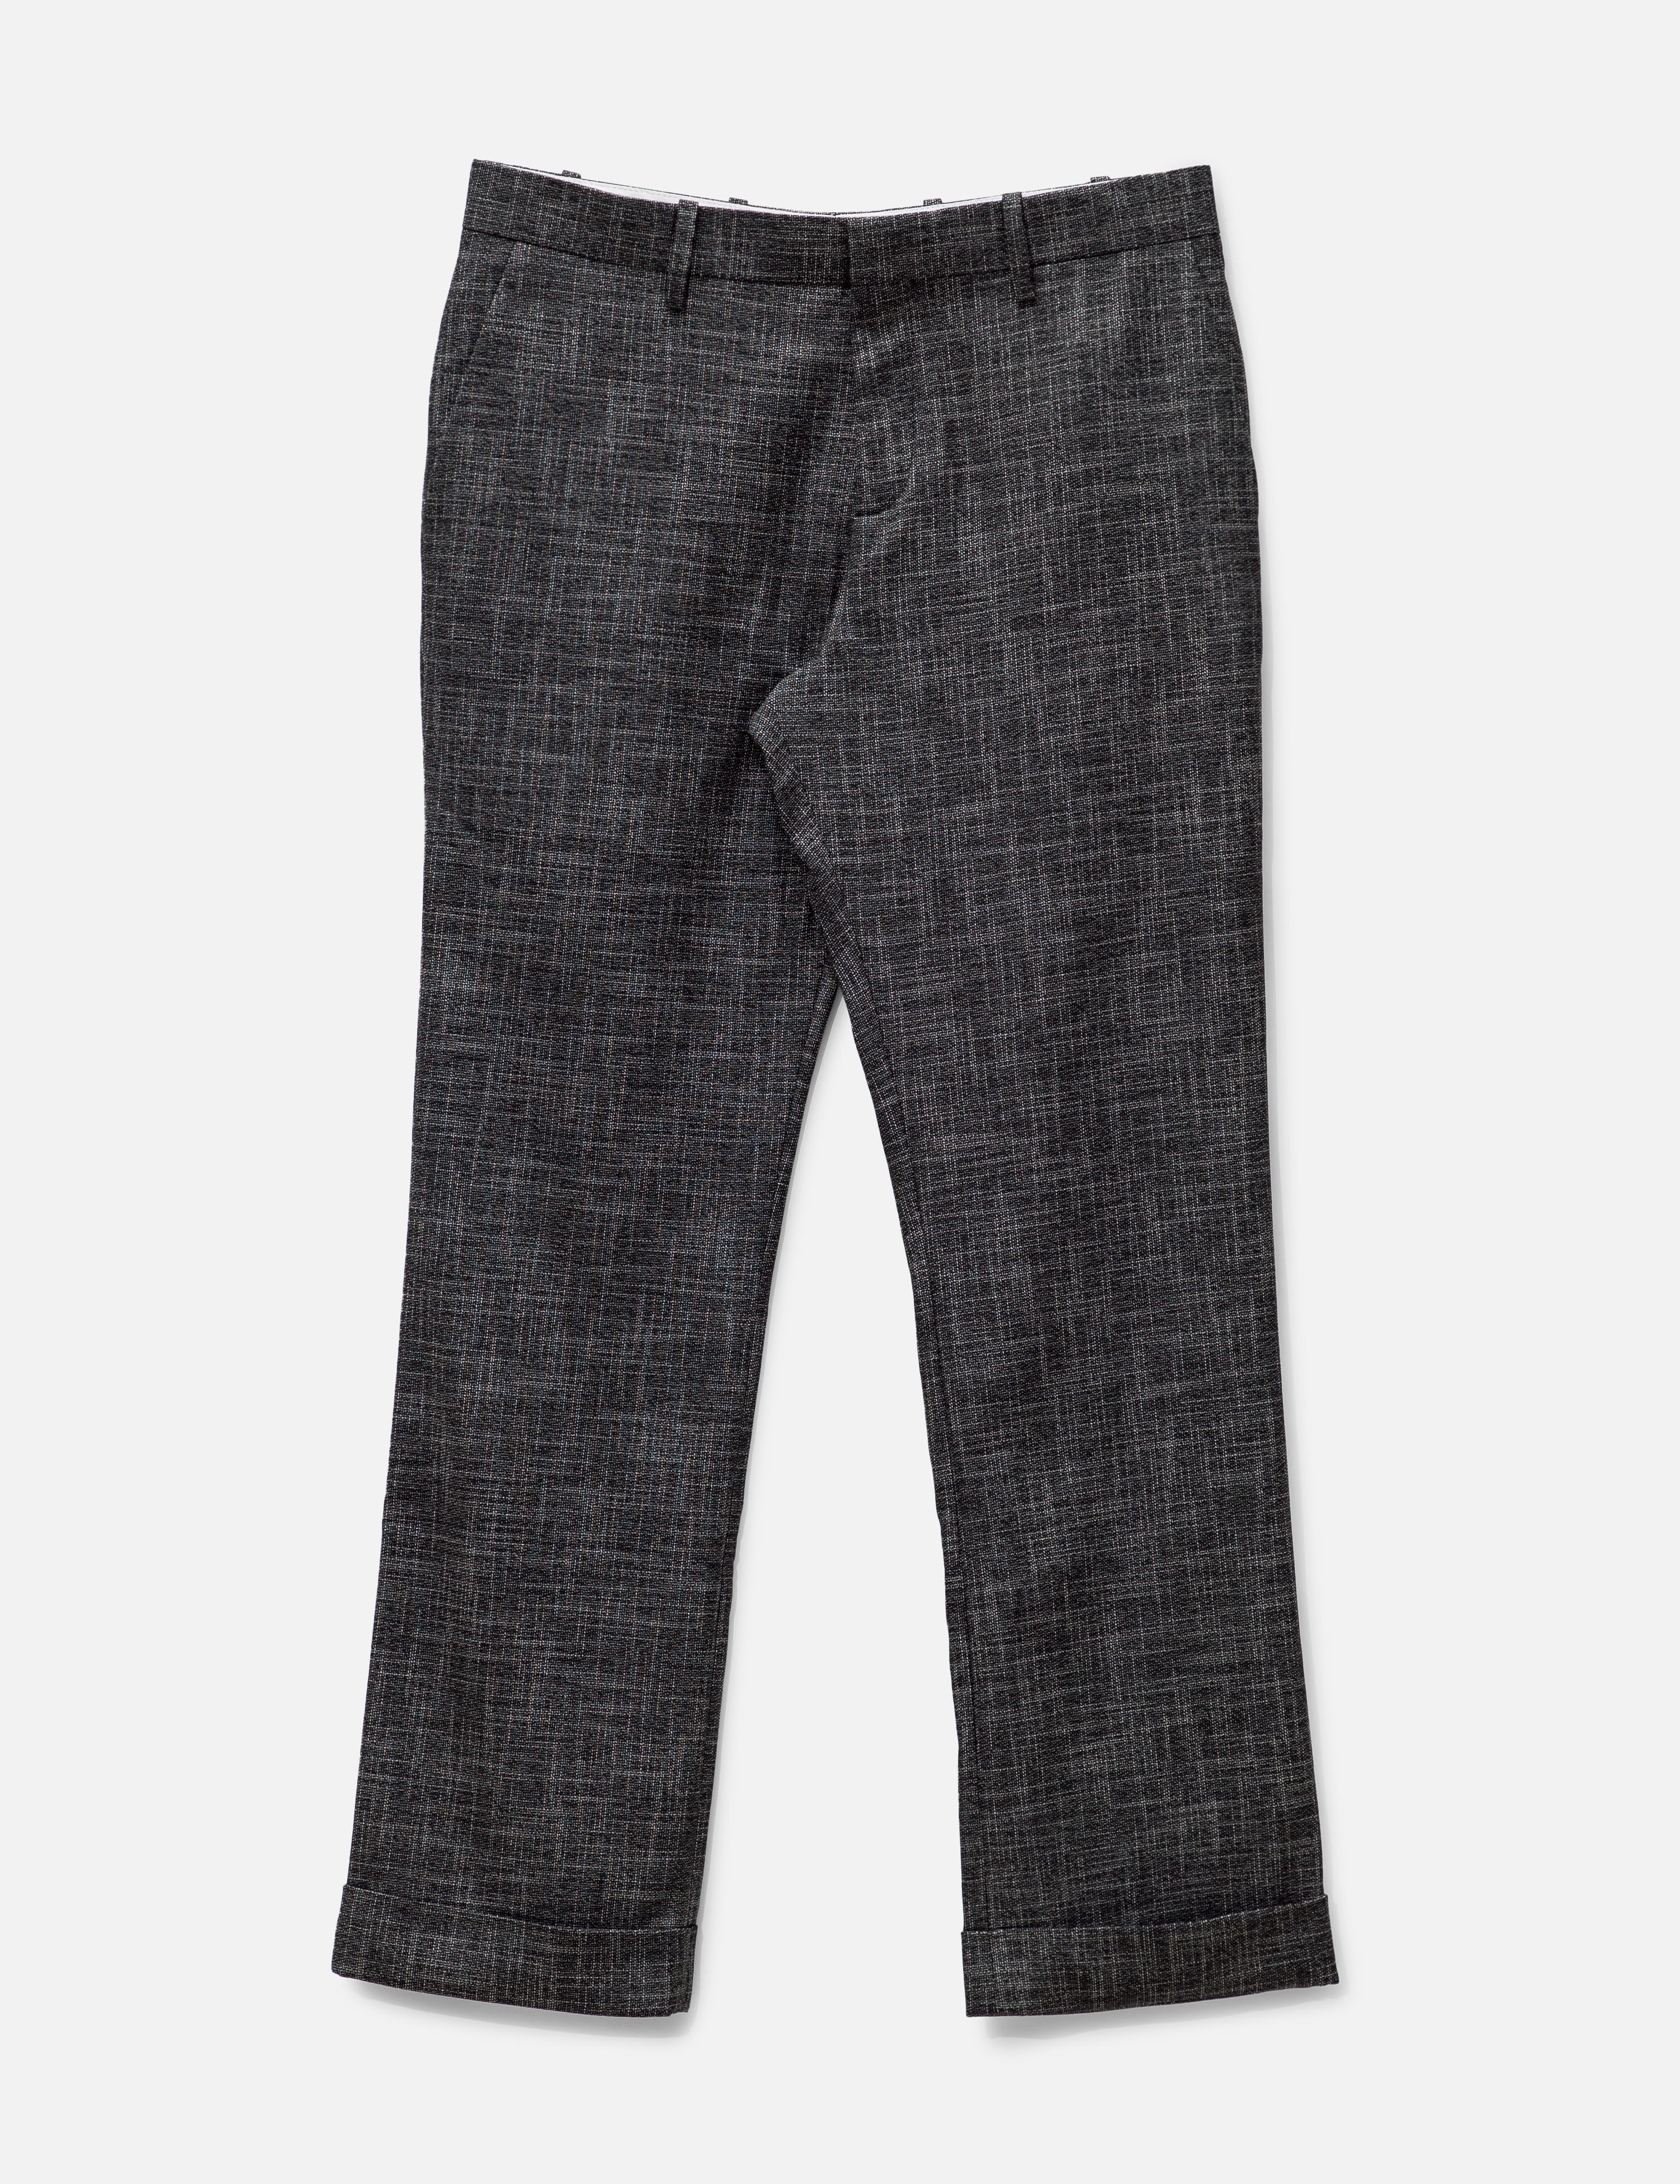 Charles Jeffrey Loverboy - Woven Straight Turn Up Trouser | HBX